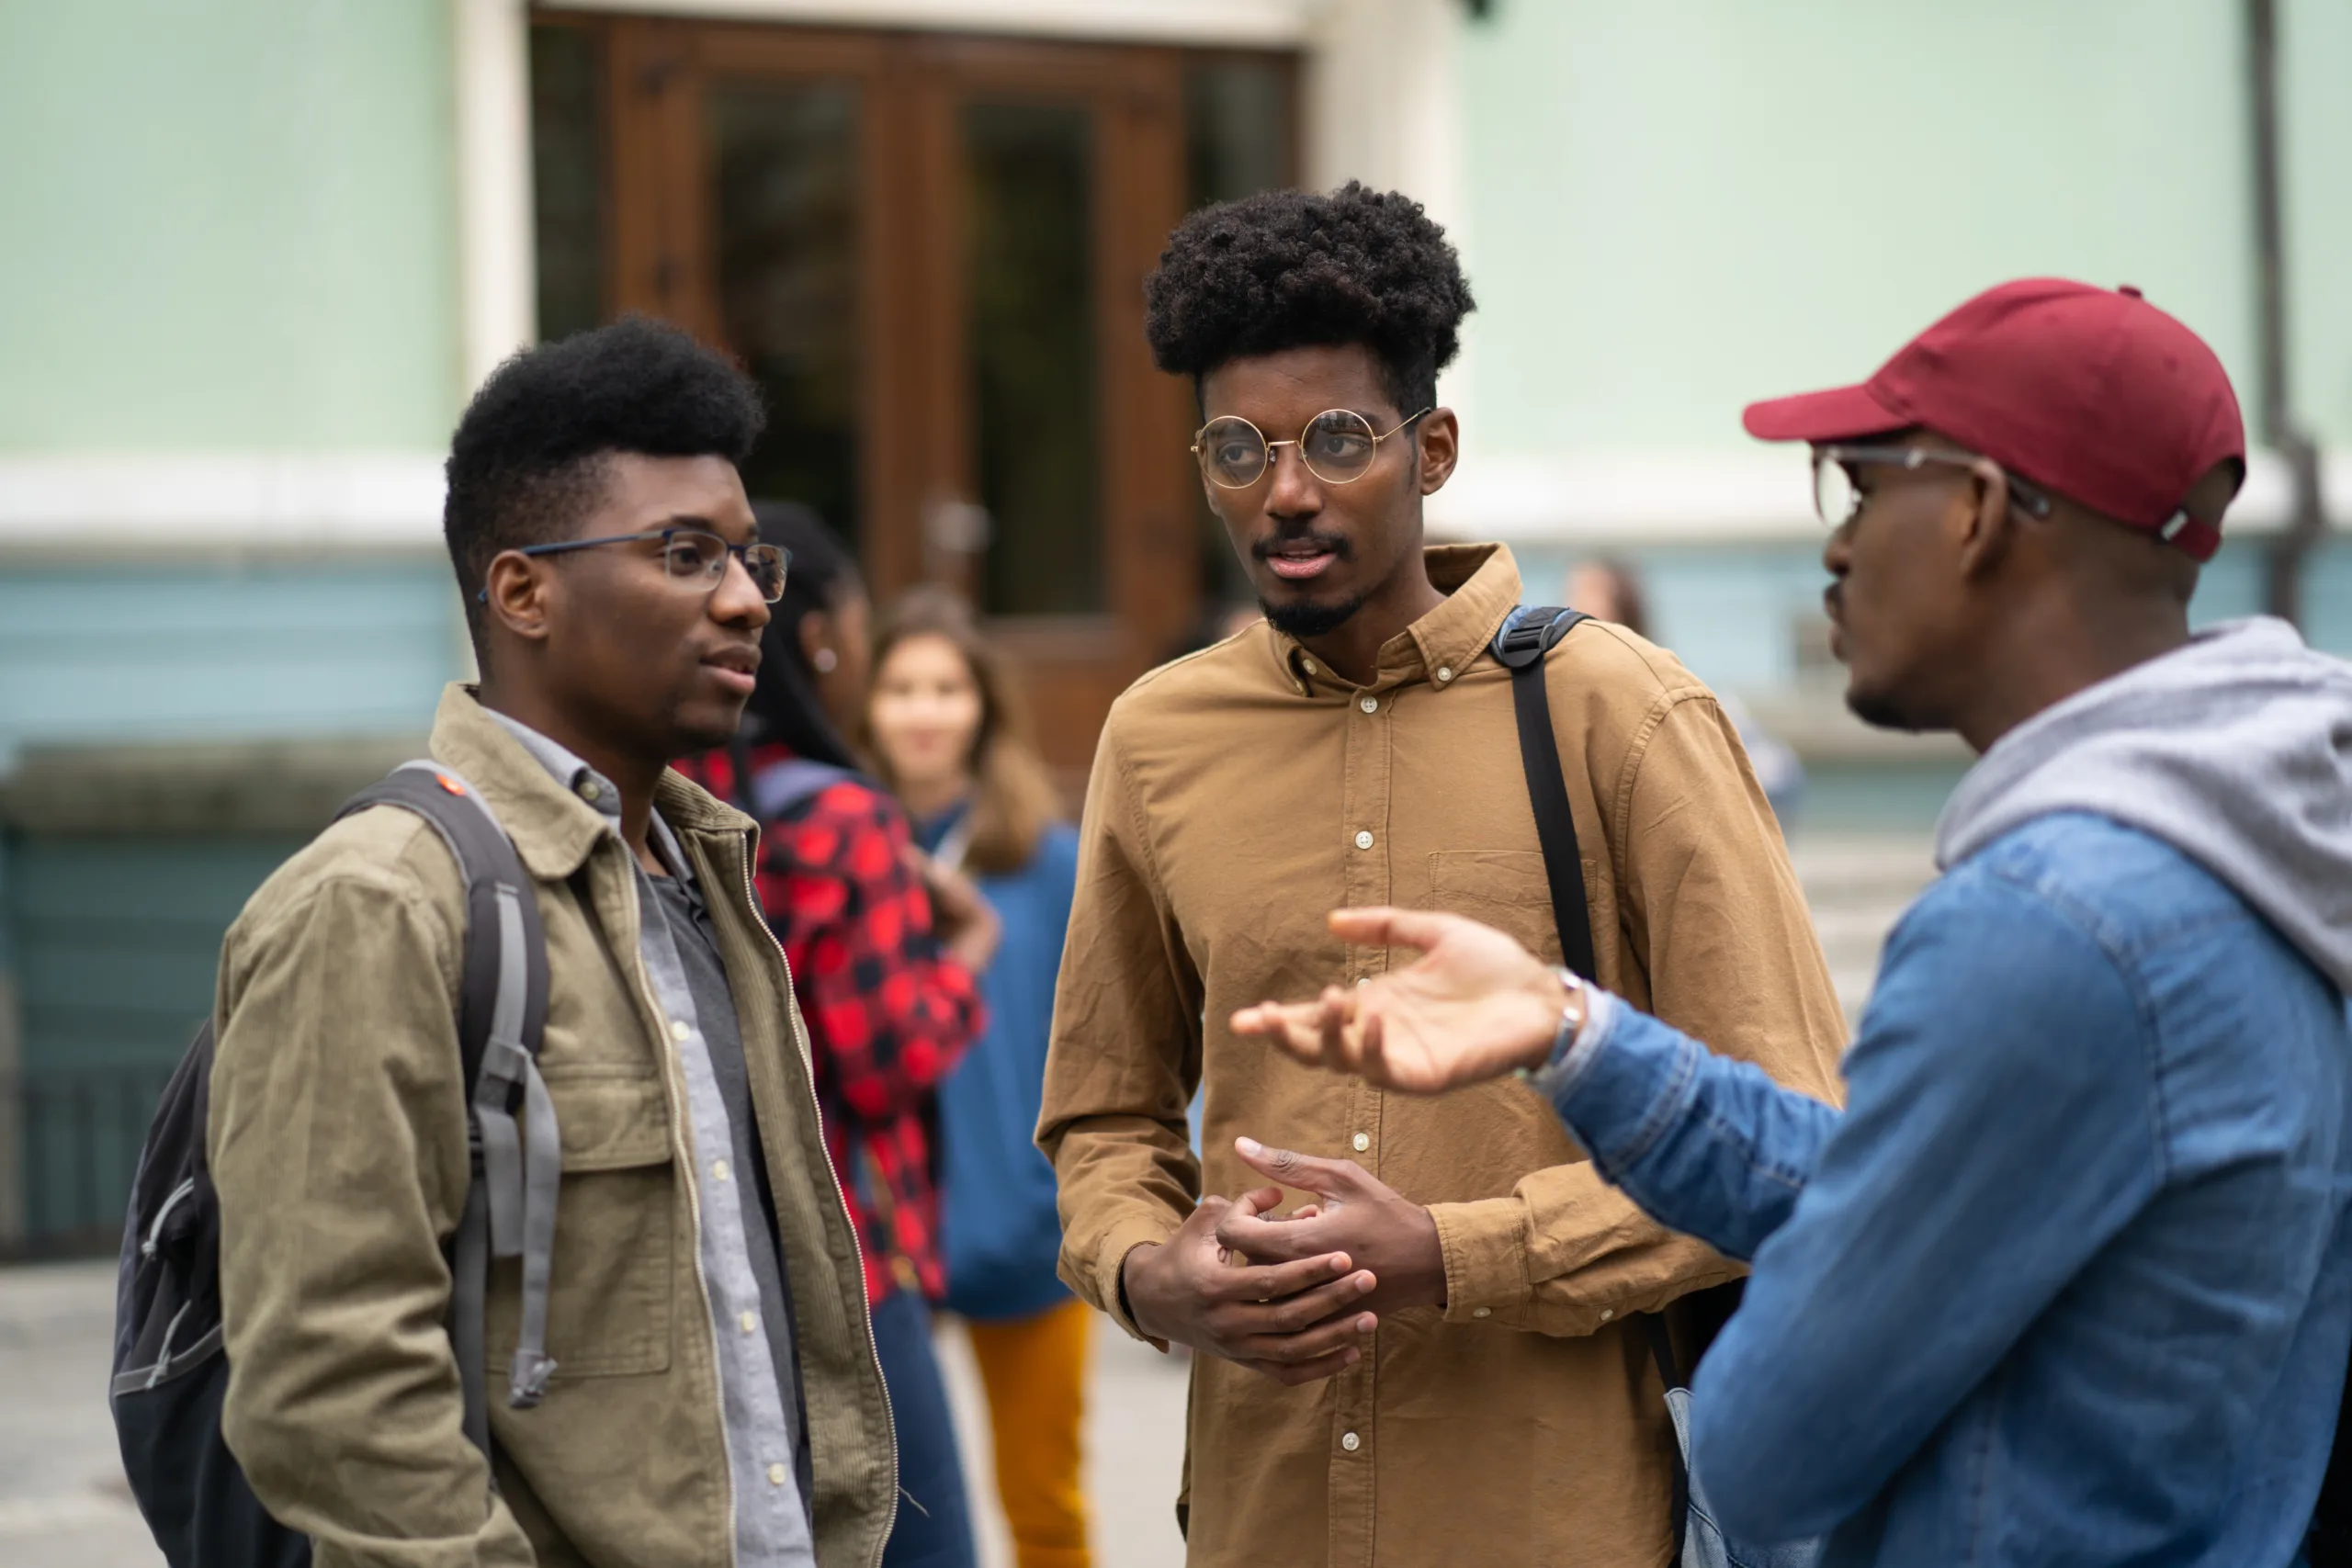 Three African-American students Standing in front of the University and talking, discussing